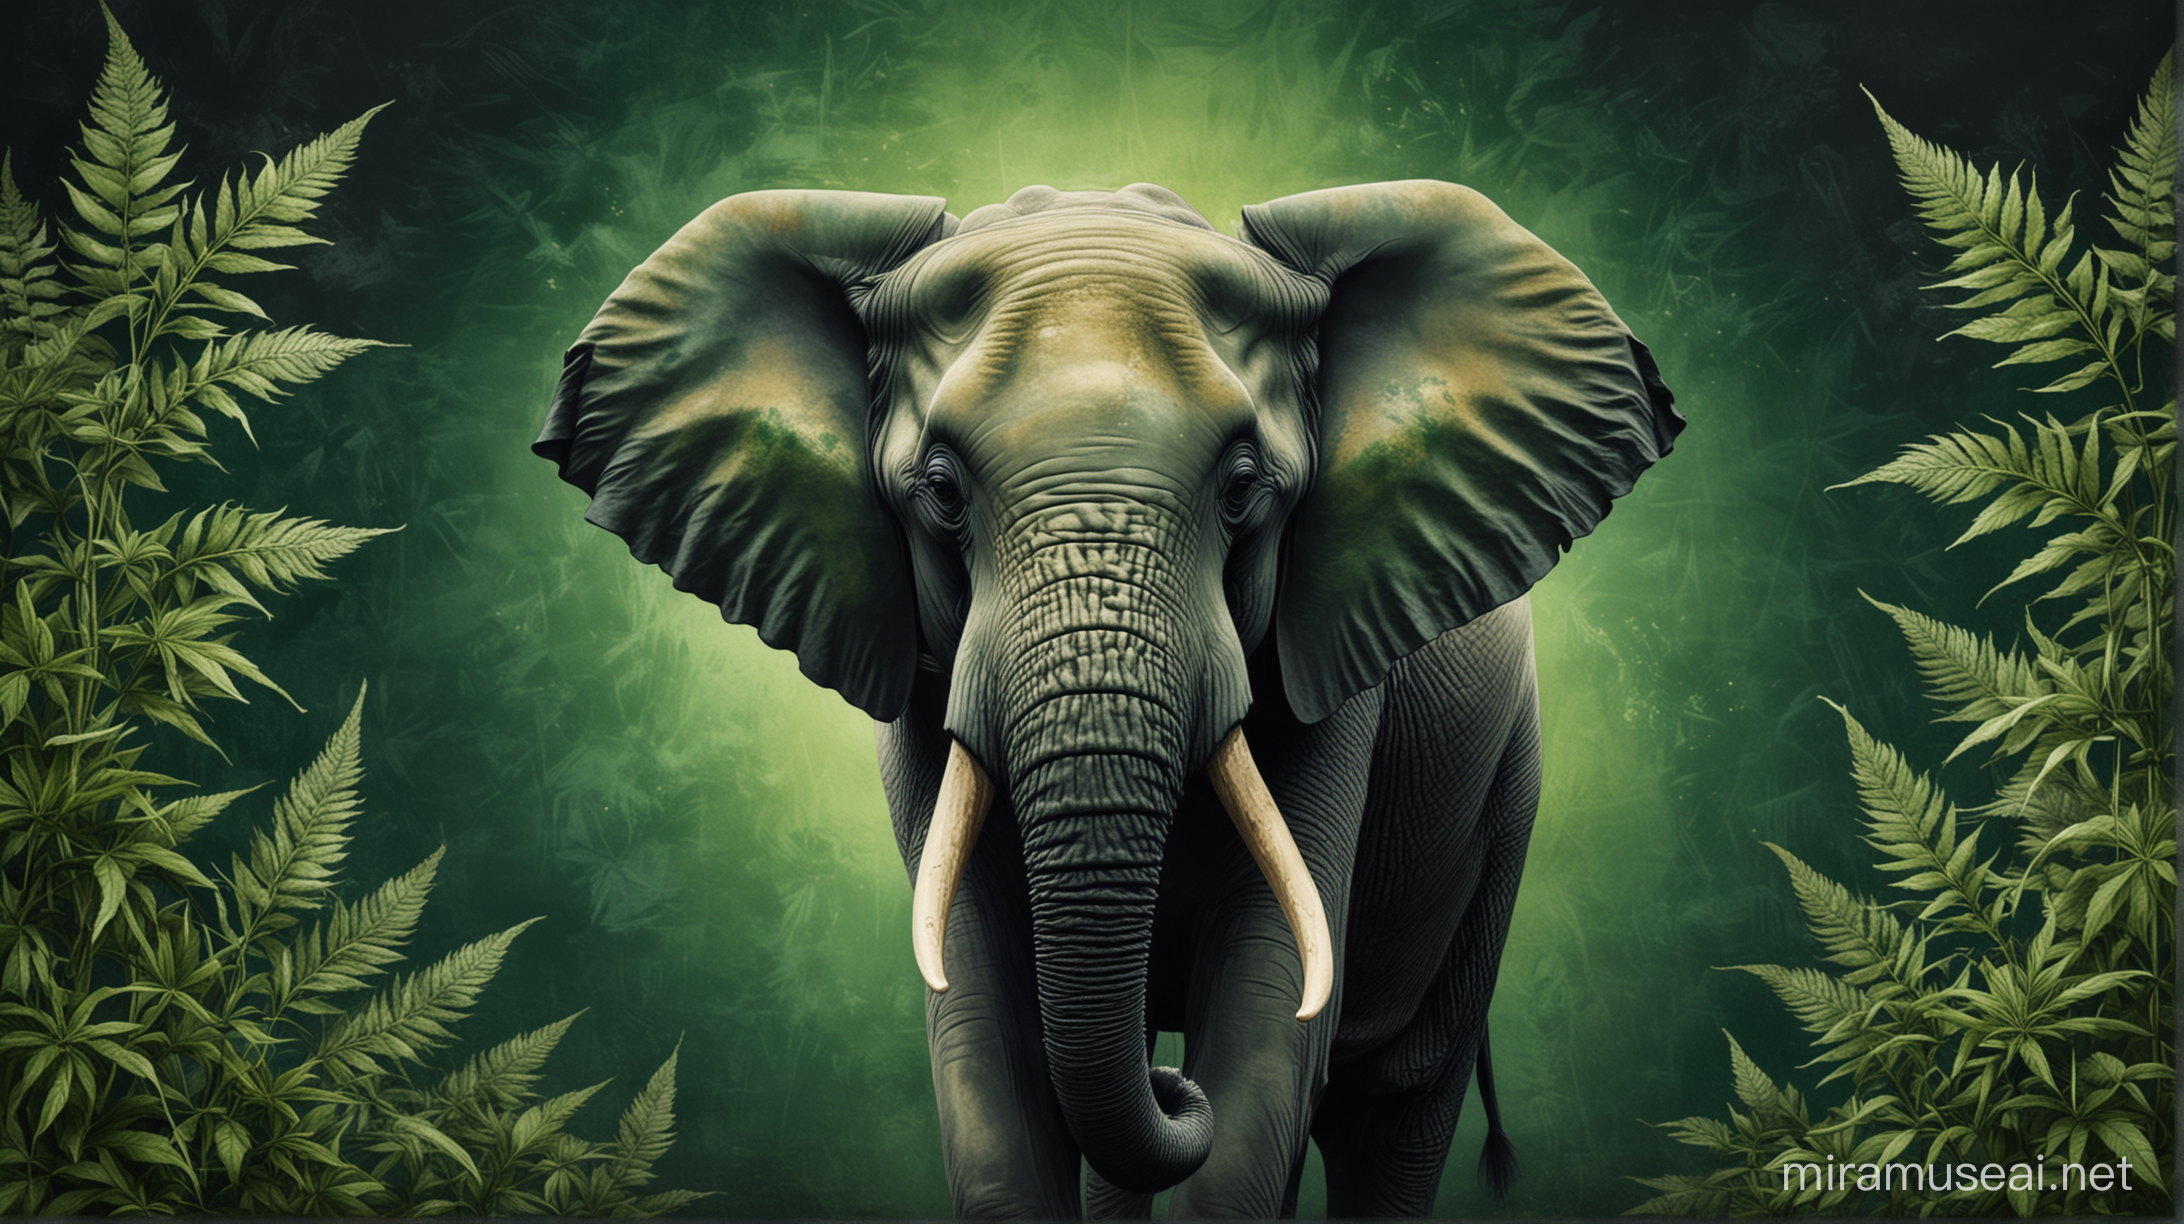 Dark green background, with an elephant on the right side facing the camera,Elephant painted in Rastoman style (marijuana elephant)